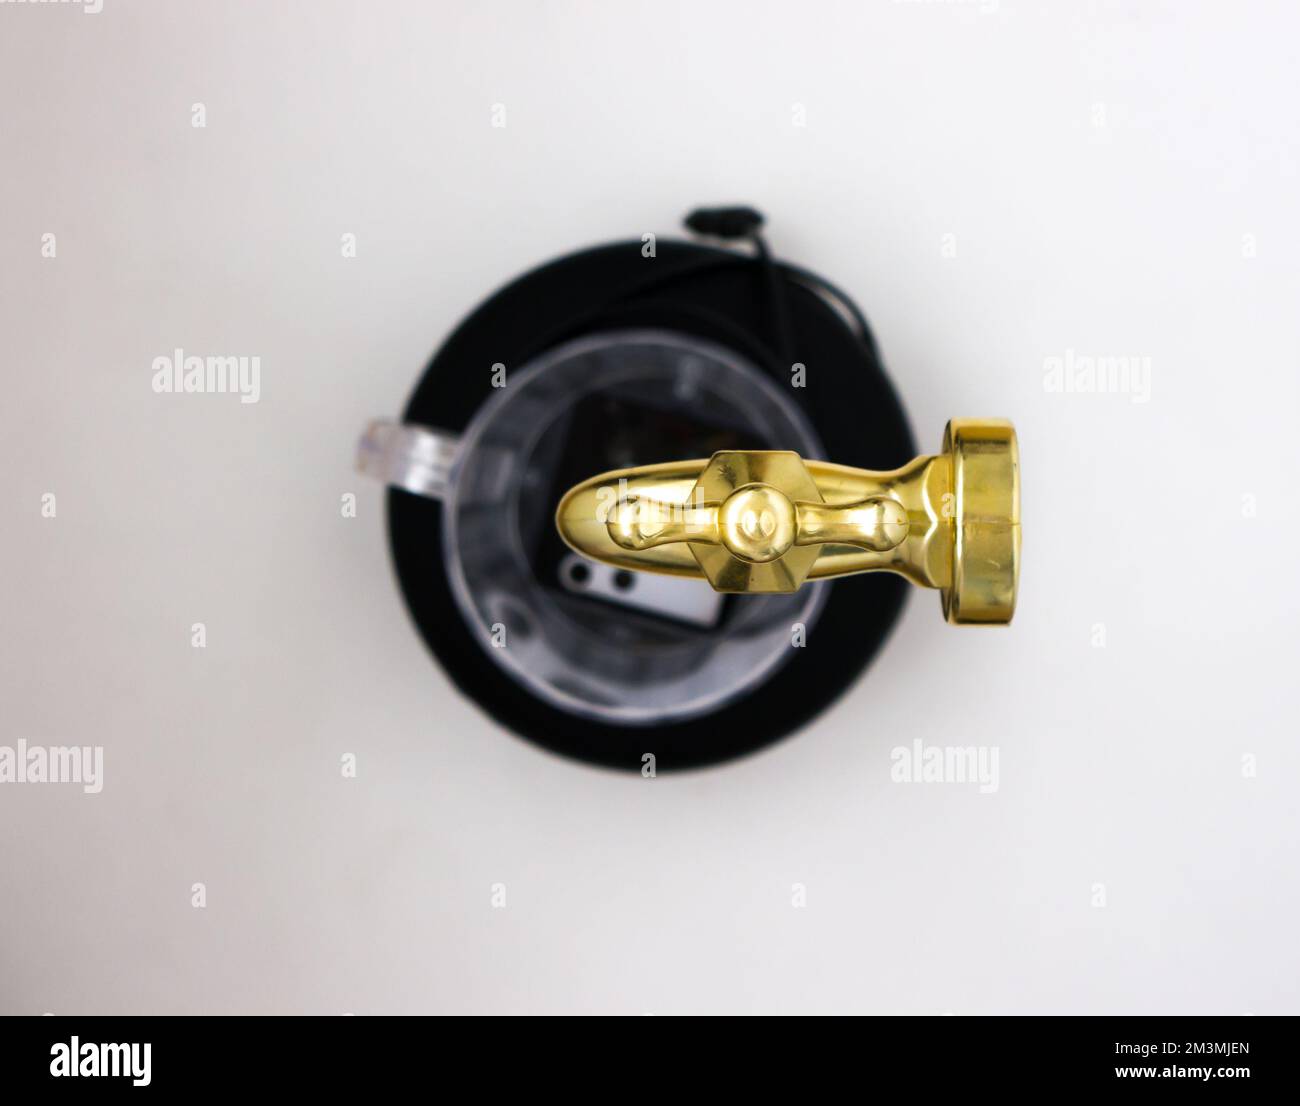 Miniature toy, Fountain with a cup. Stock Photo